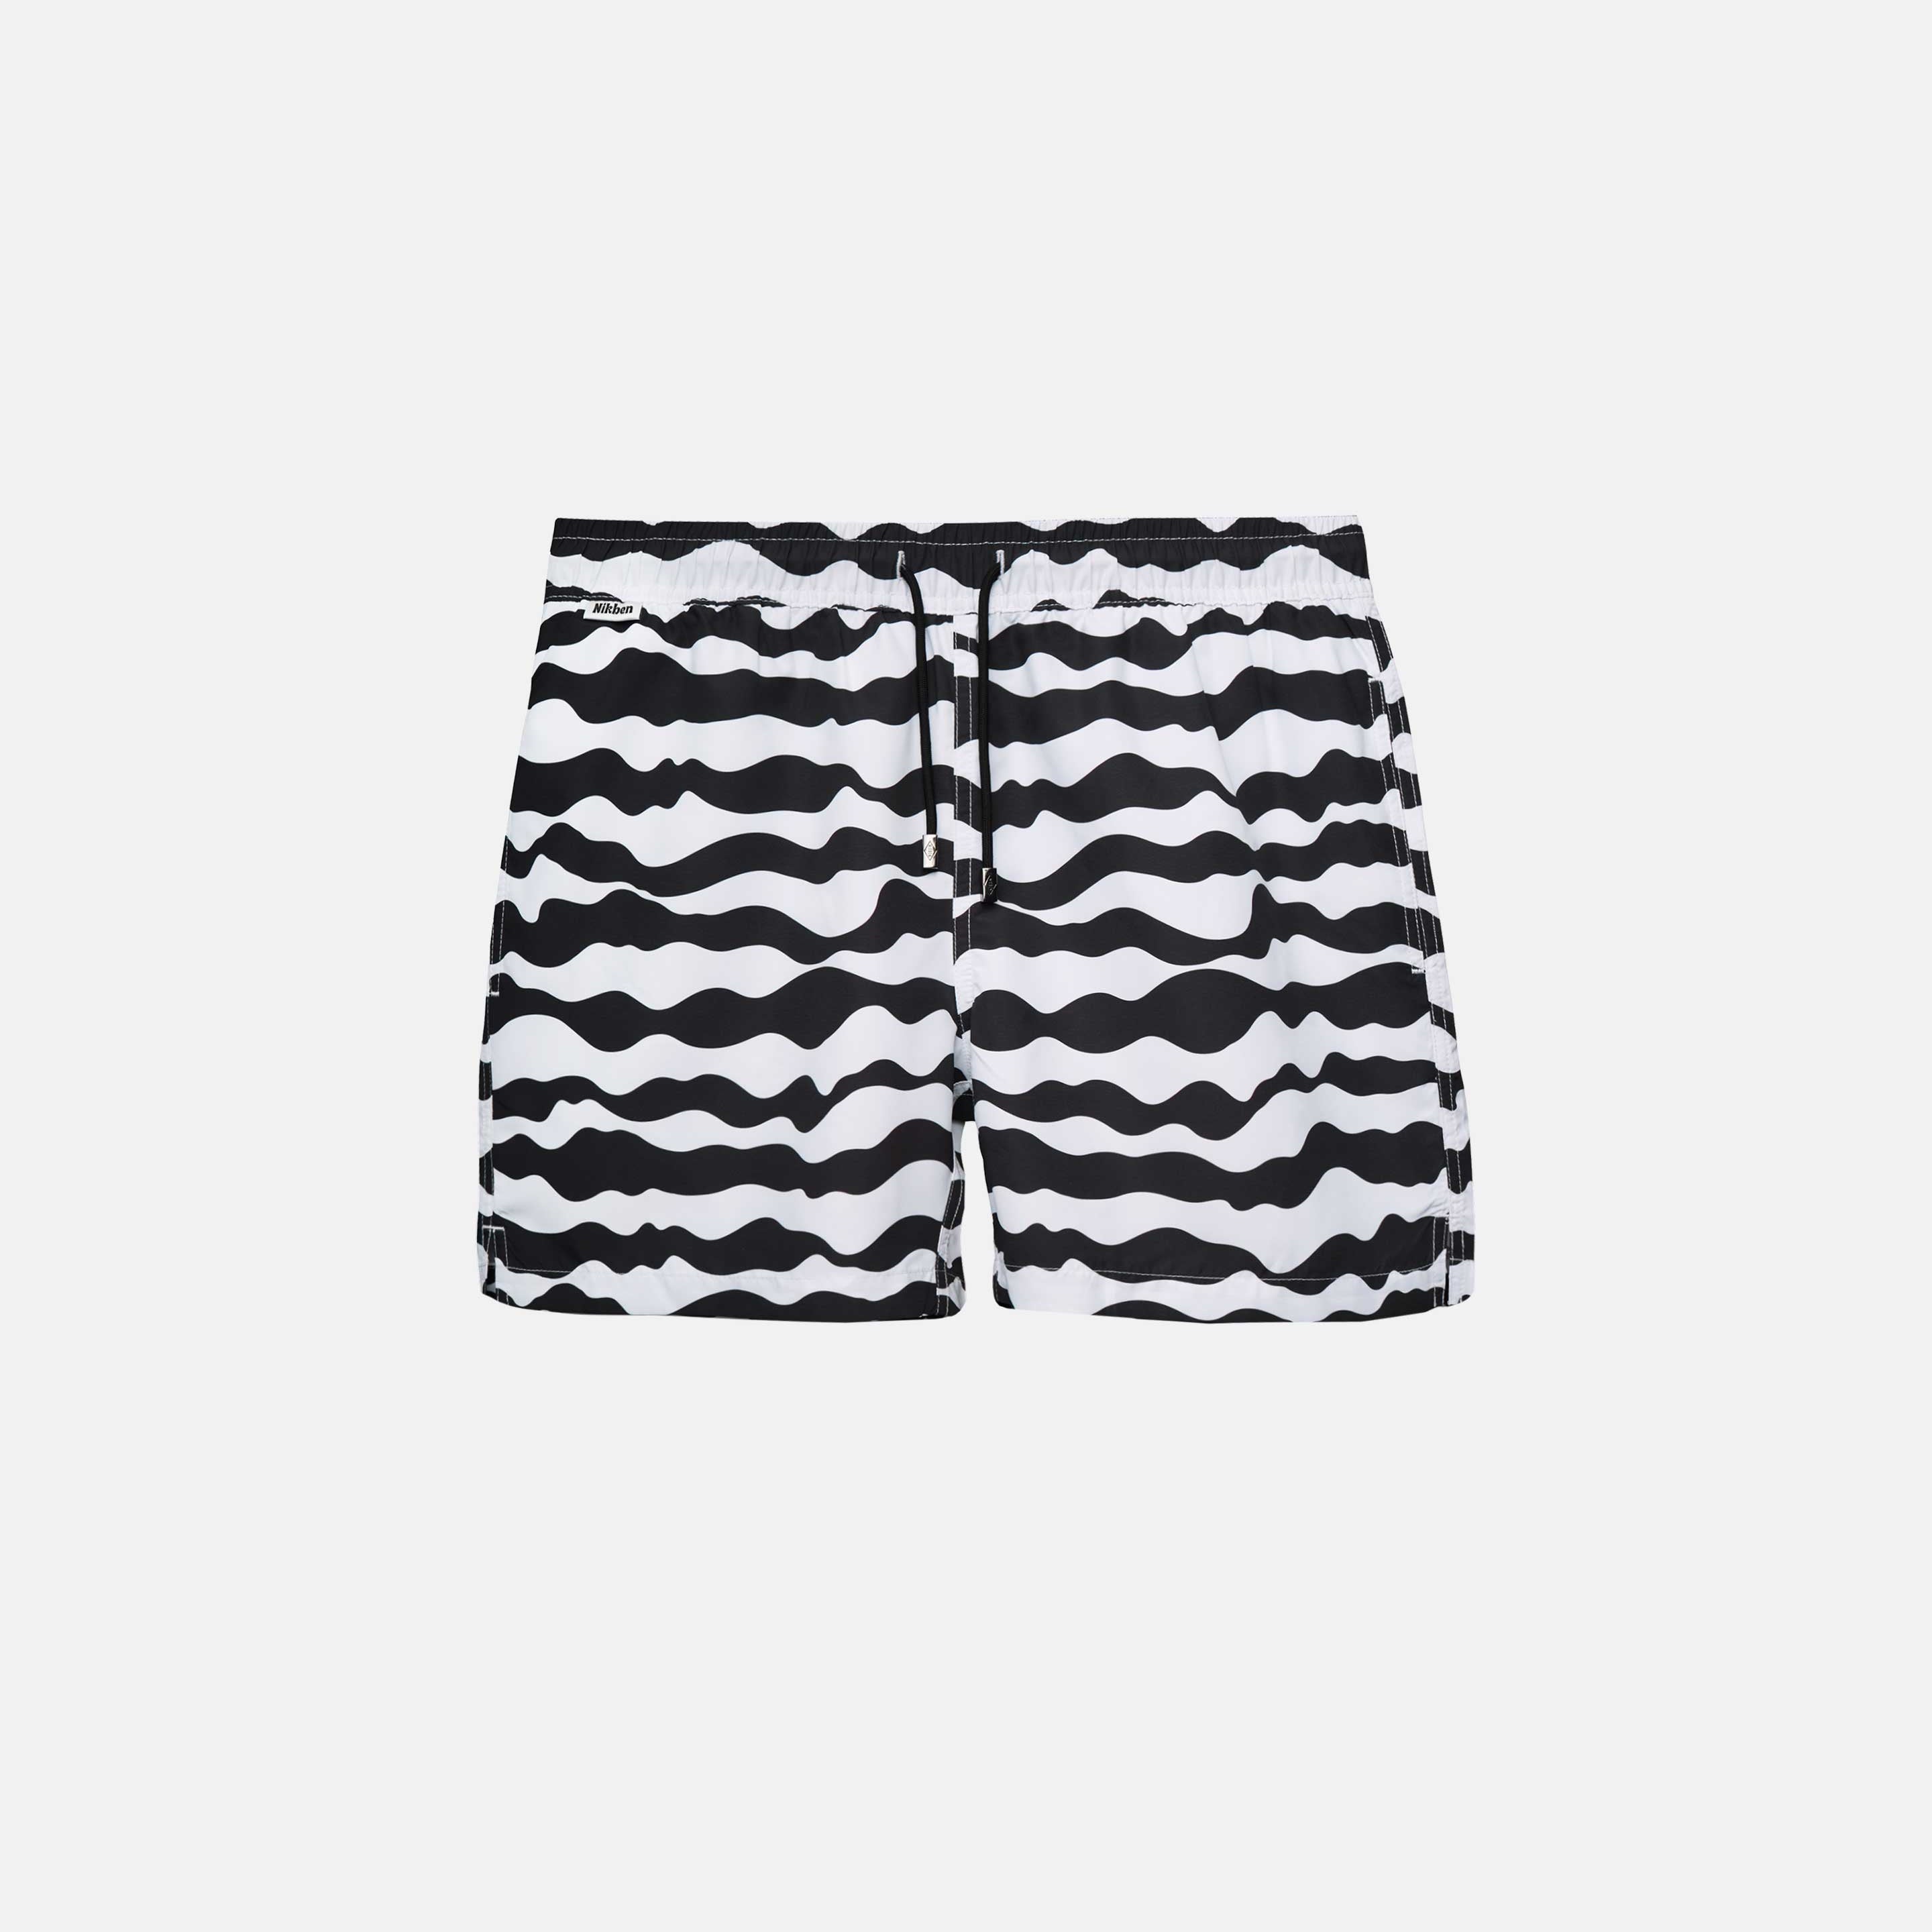 Black and white mid length swim trunks. Mid length with drawstring and two side pockets.